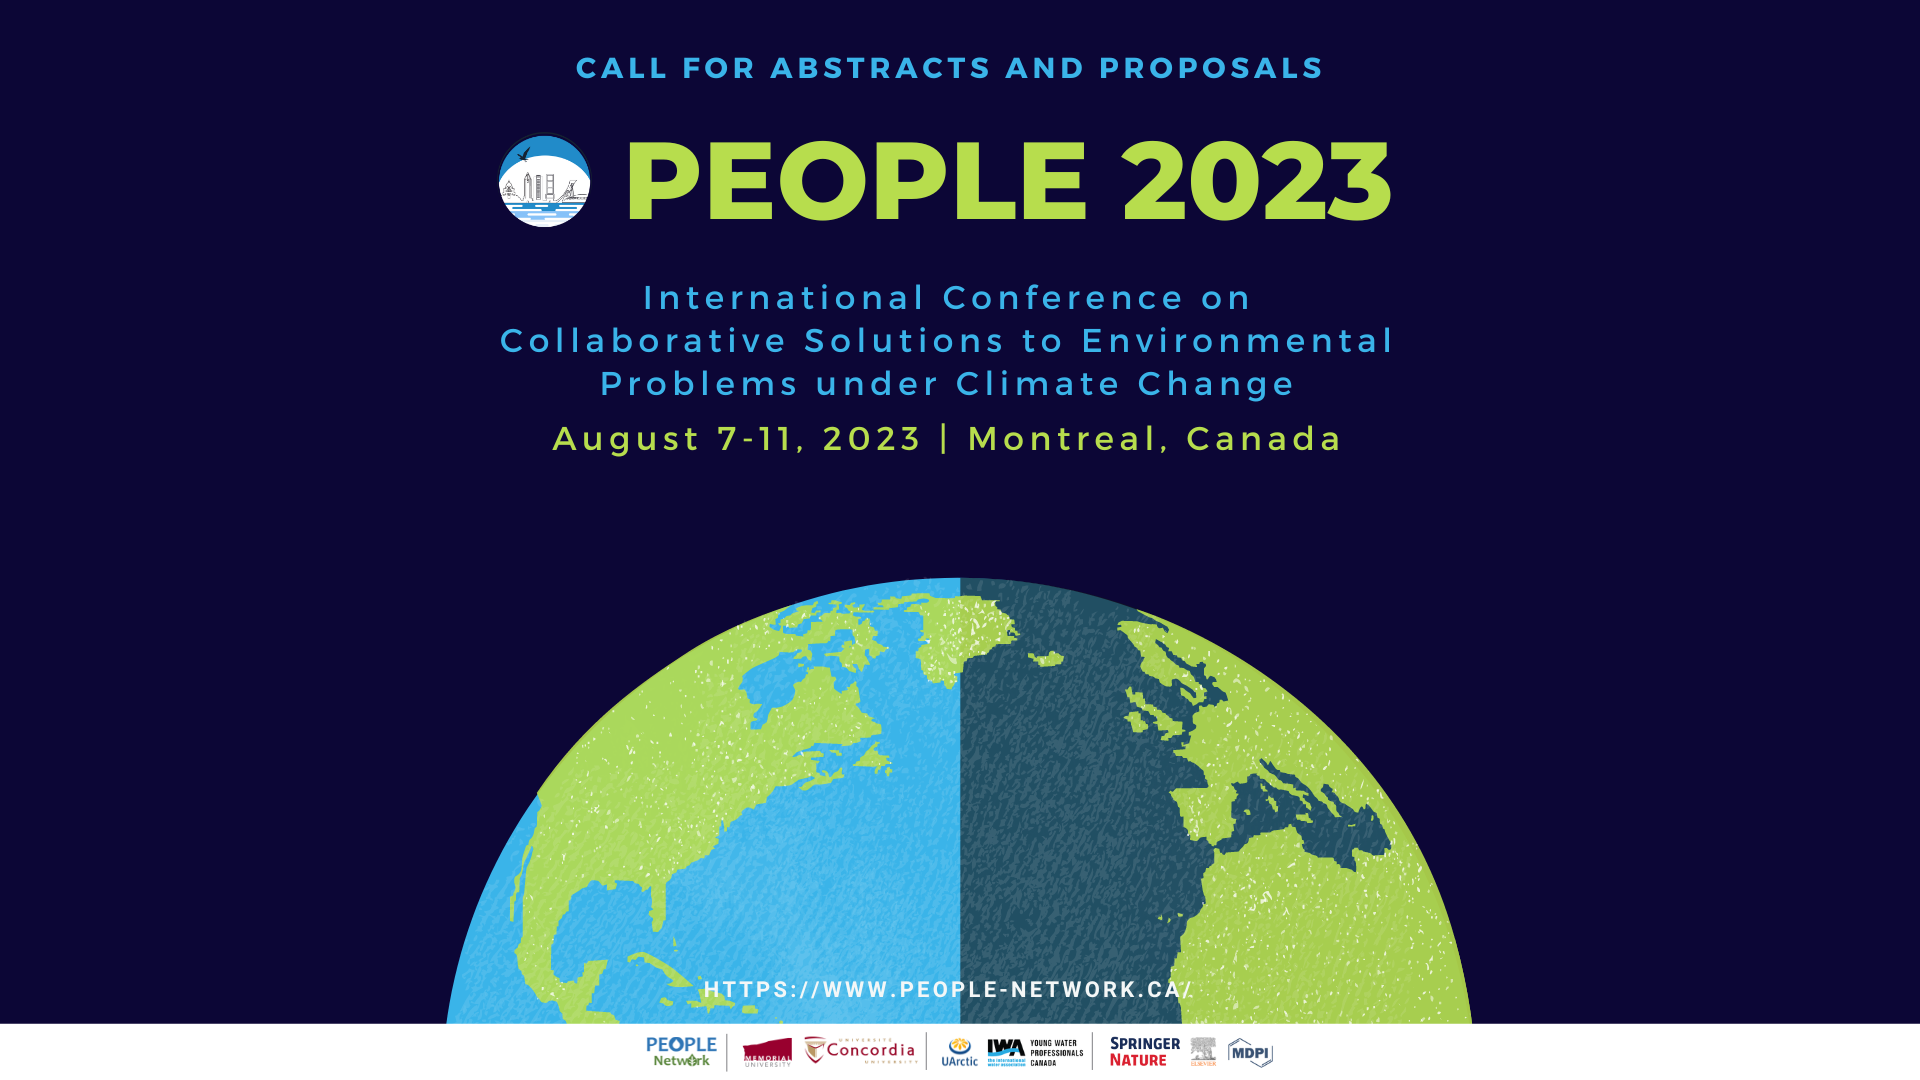 PEOPLE 2023 International Conference